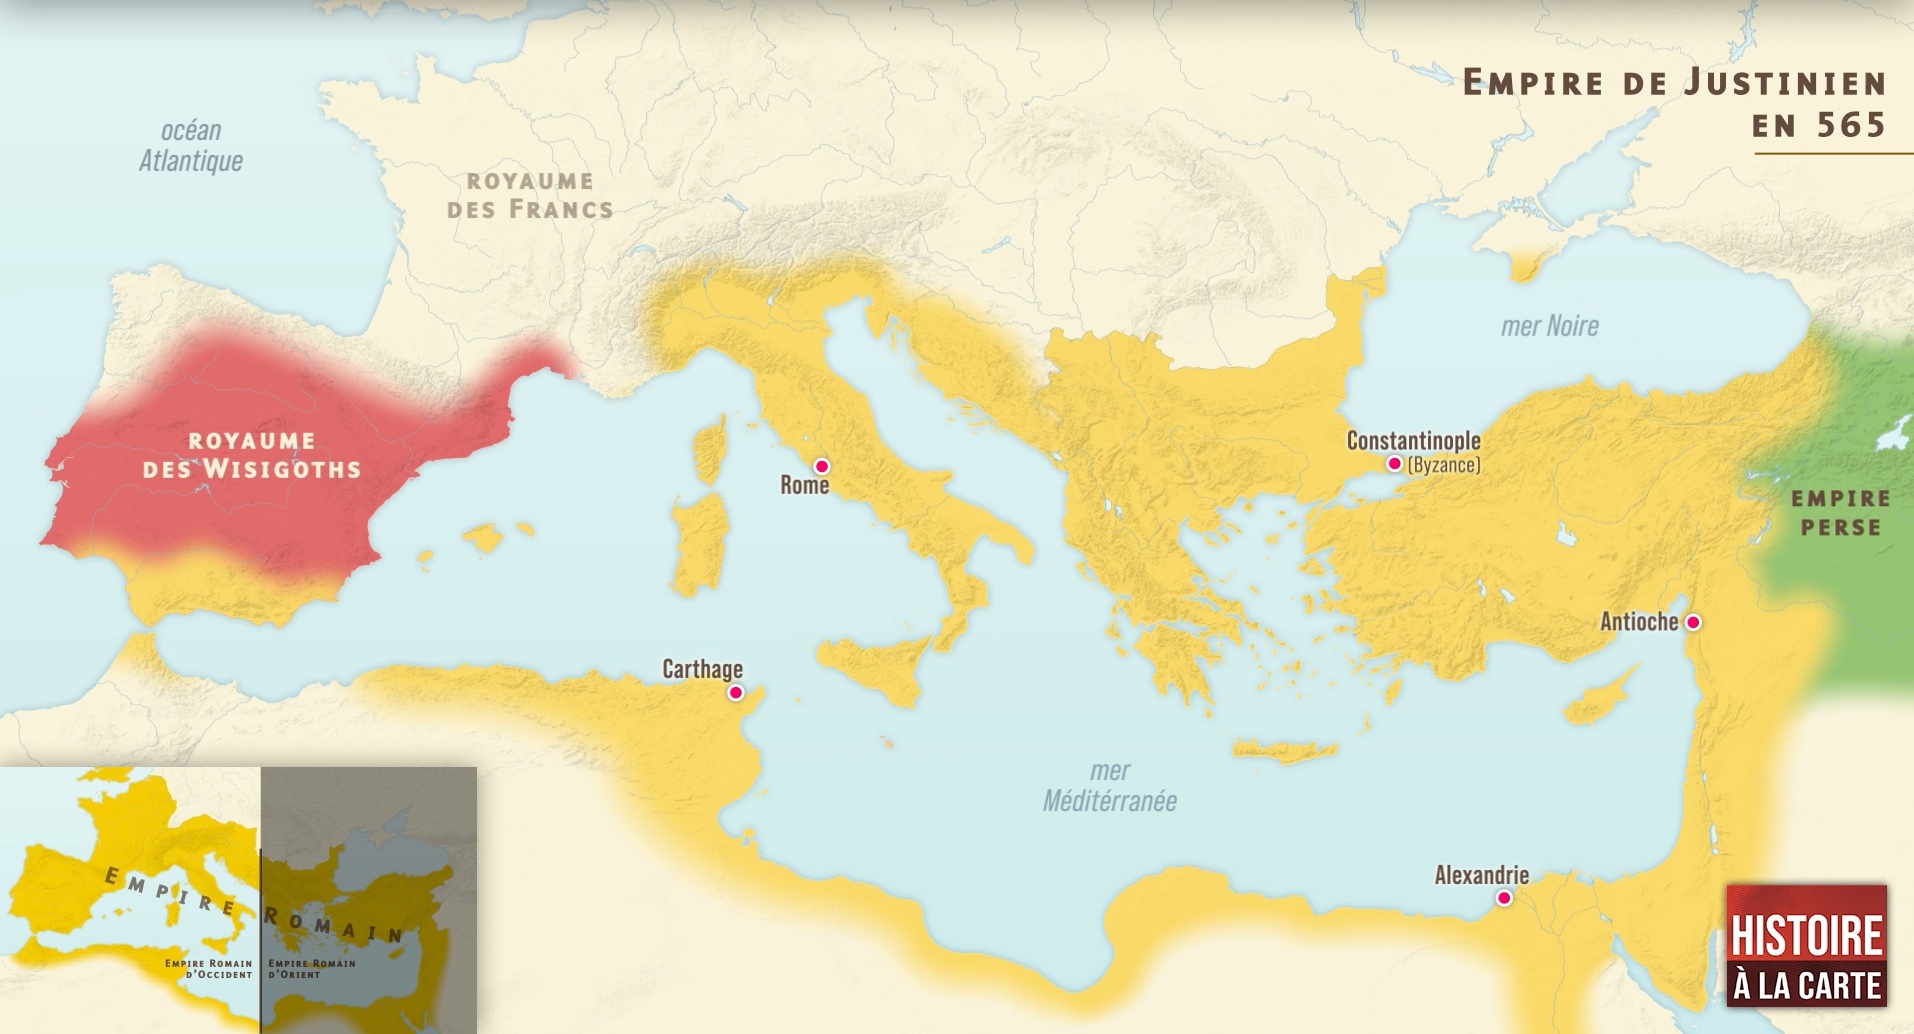 The conquests of Justinian